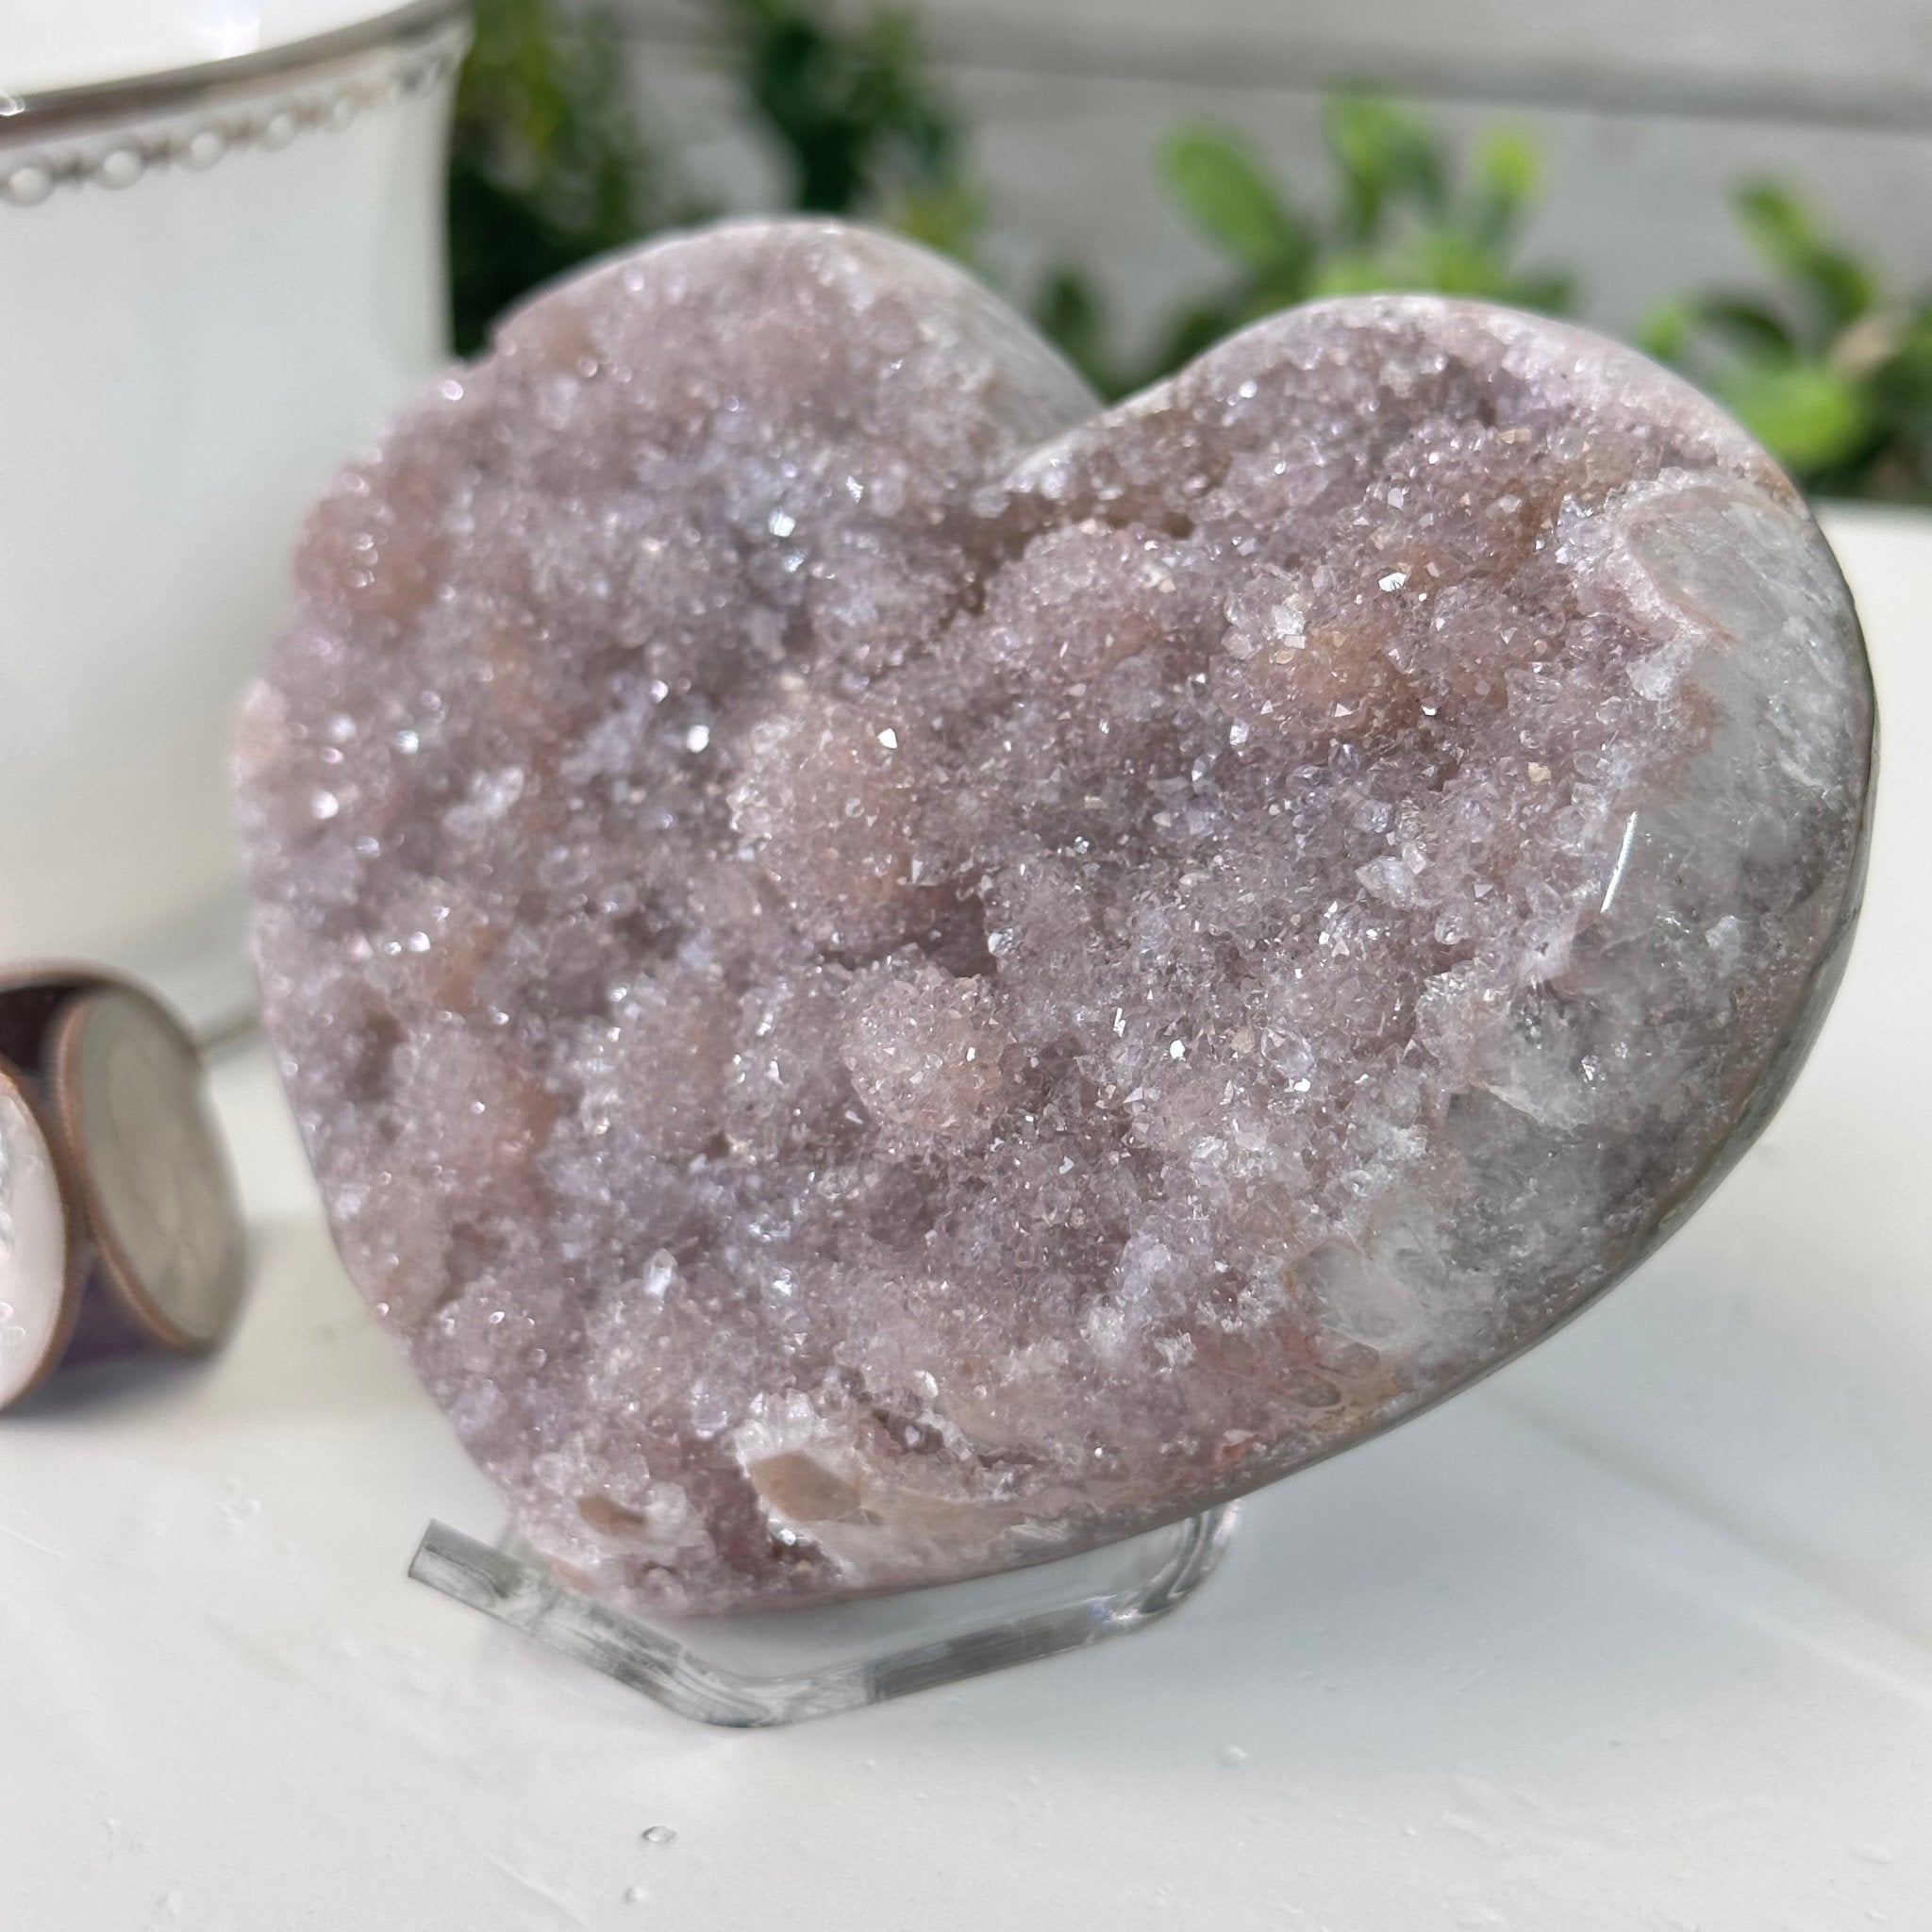 Extra Quality Amethyst Heart Geode on an Acrylic Stand, 0.91 lbs & 2.7" Tall #5462-0051 by Brazil Gems - Brazil GemsBrazil GemsExtra Quality Amethyst Heart Geode on an Acrylic Stand, 0.91 lbs & 2.7" Tall #5462-0051 by Brazil GemsHearts5462-0051